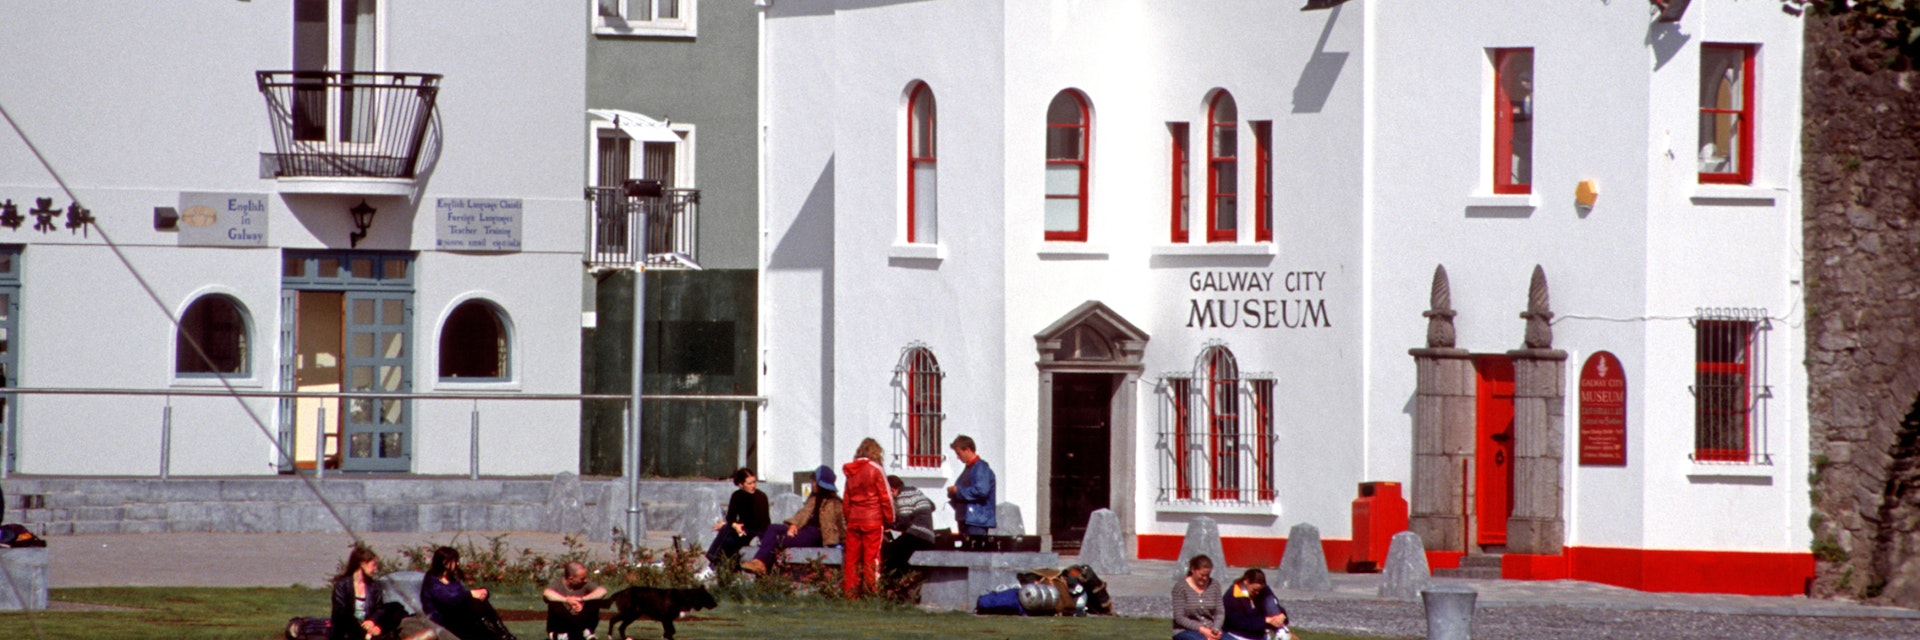 Galway, Ireland - June 17th 2005: Teenagers, some with backpacks, sitting on the bank of river Corrib, front the Galway City Museum.